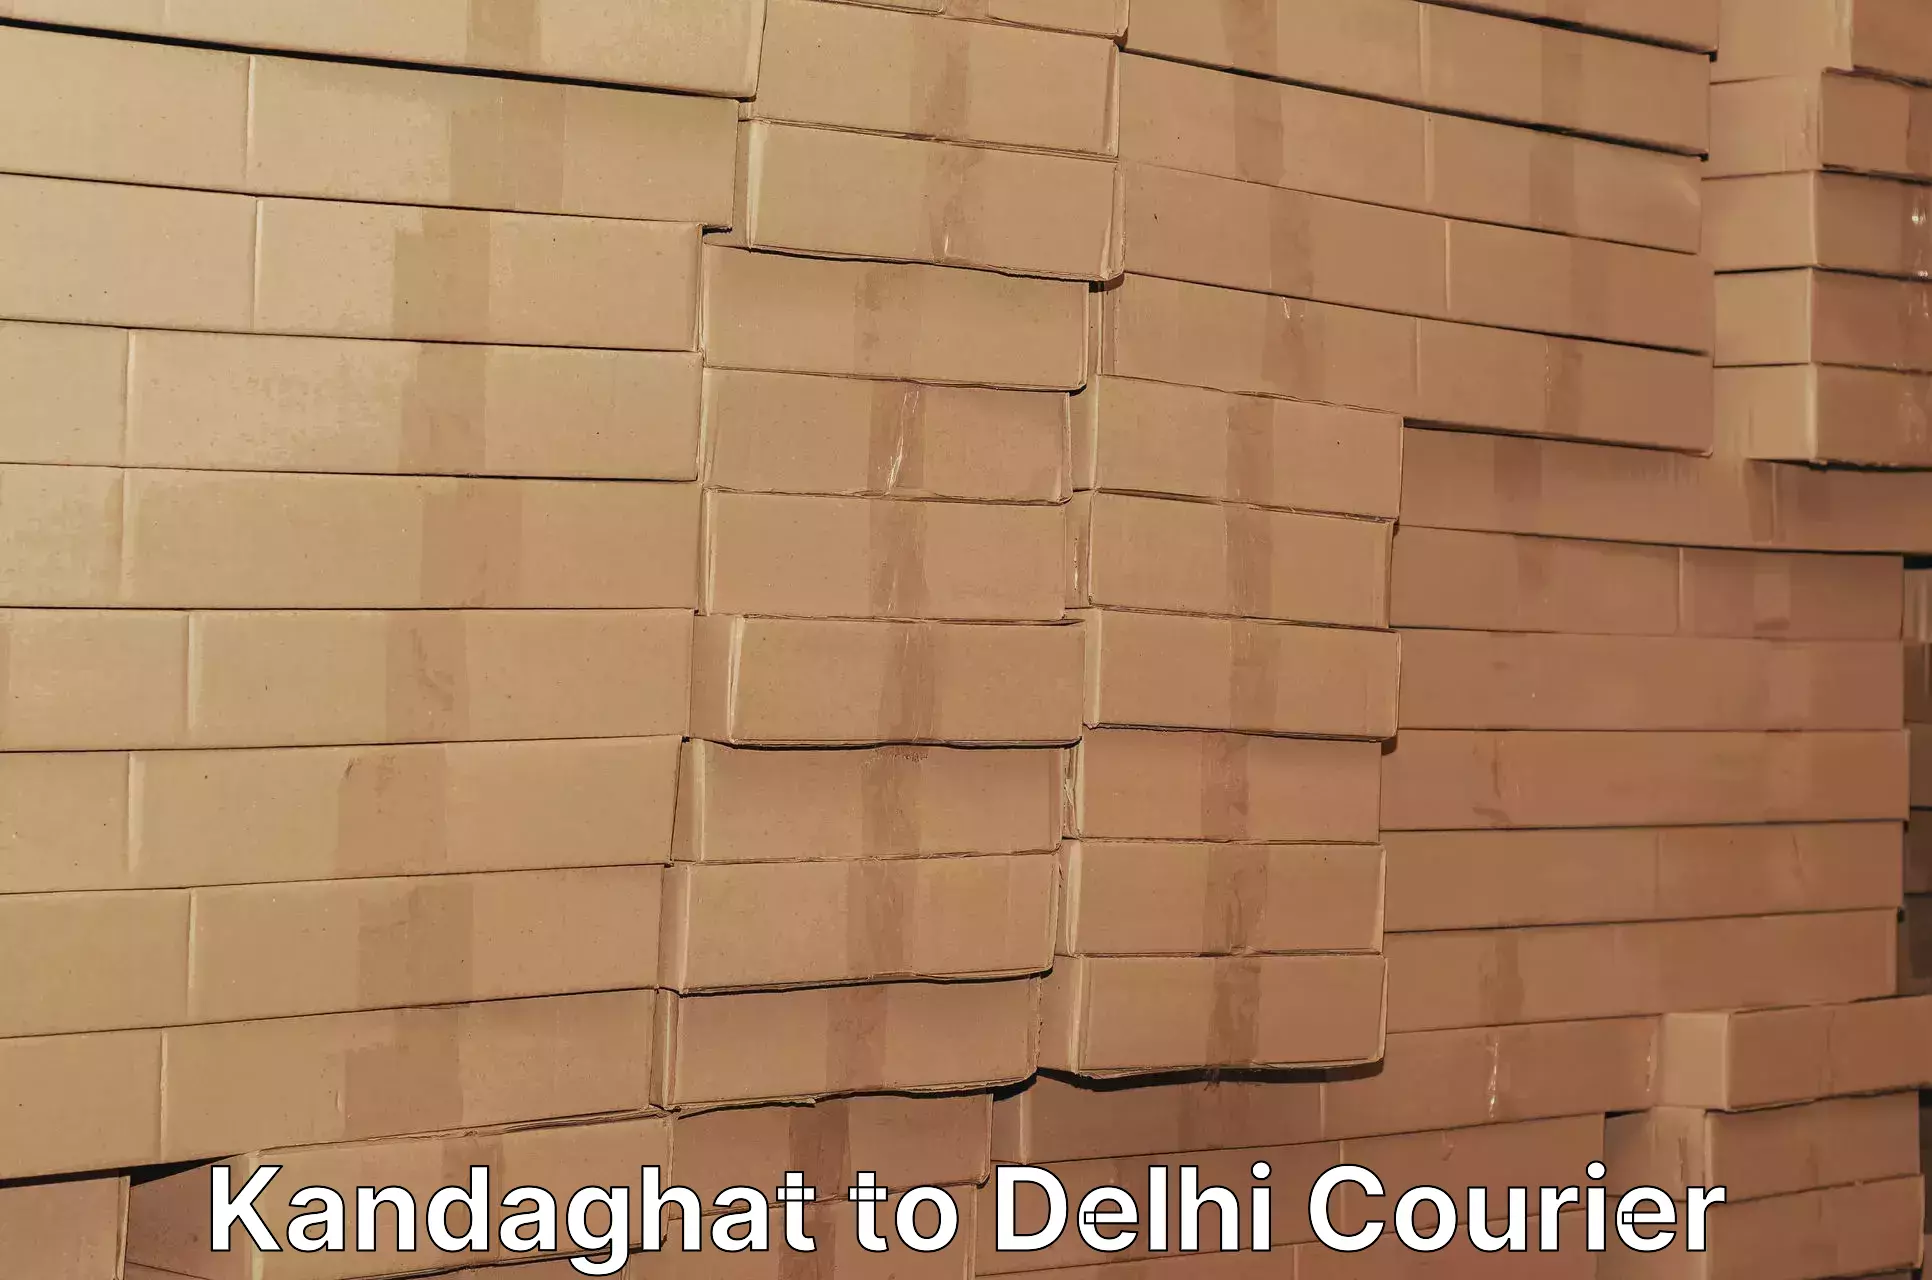 24/7 courier service Kandaghat to Delhi